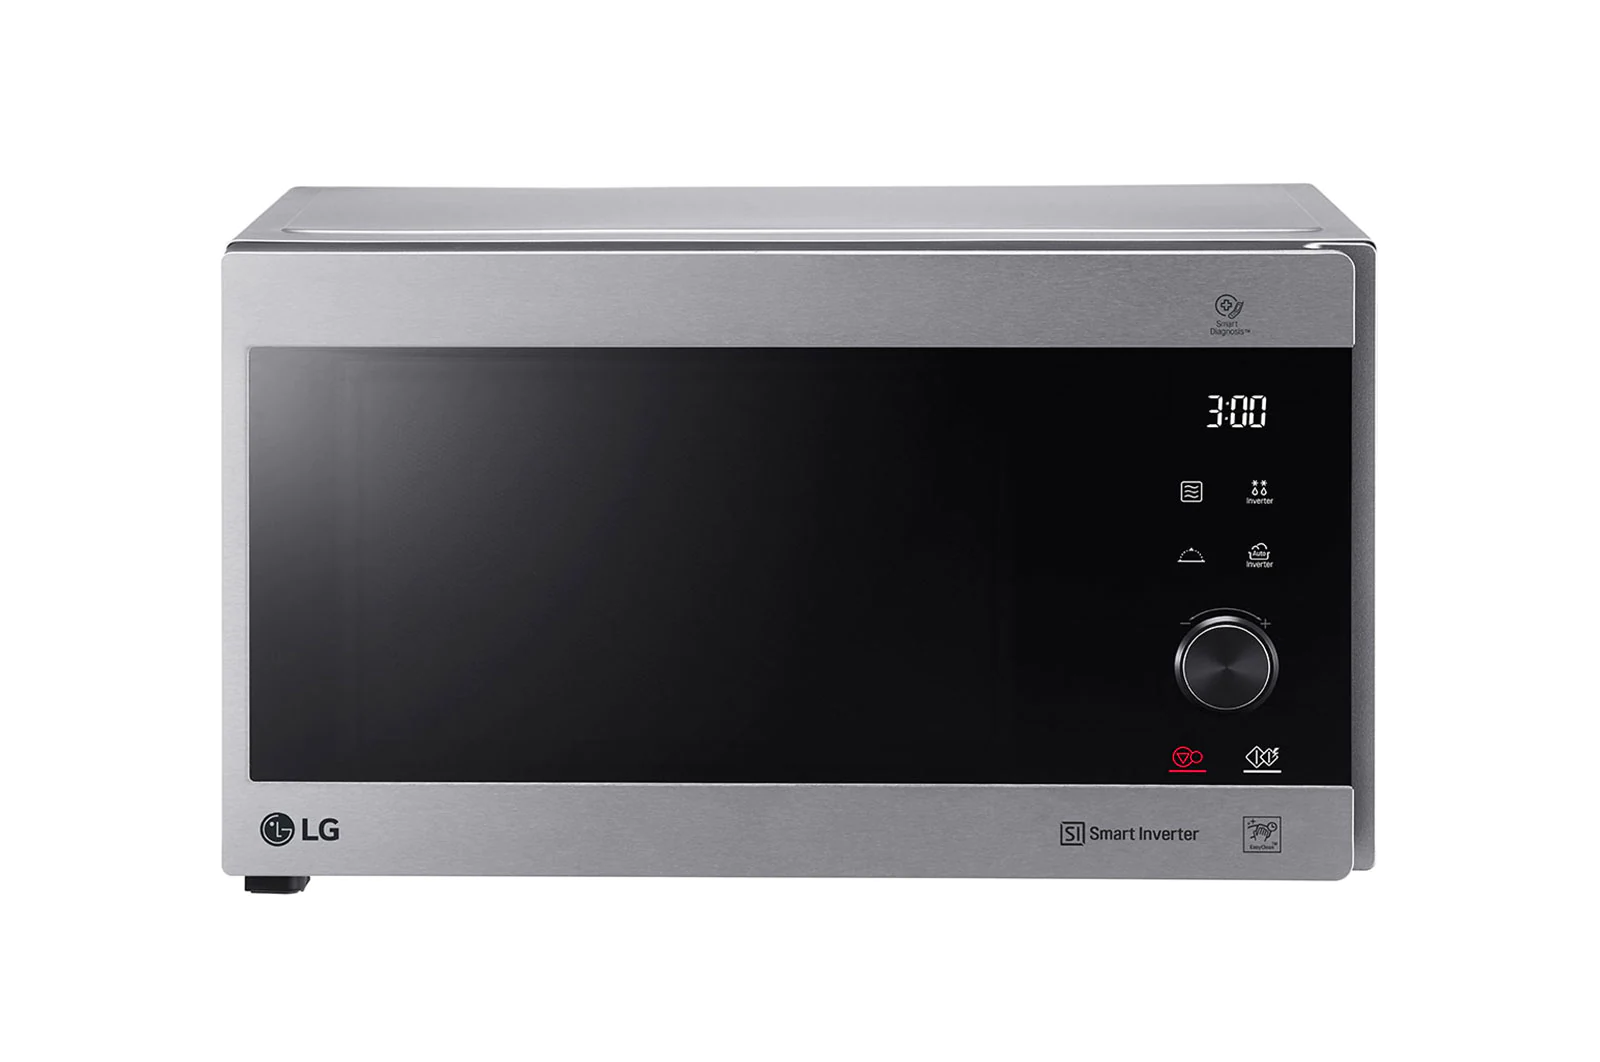 LG MH8265CIS Microwave Oven, 42litres, Silver, Smart Inverter with 10years warranty, Grill, Smart Auto Cook, Anti Bacteria, LED Lighting